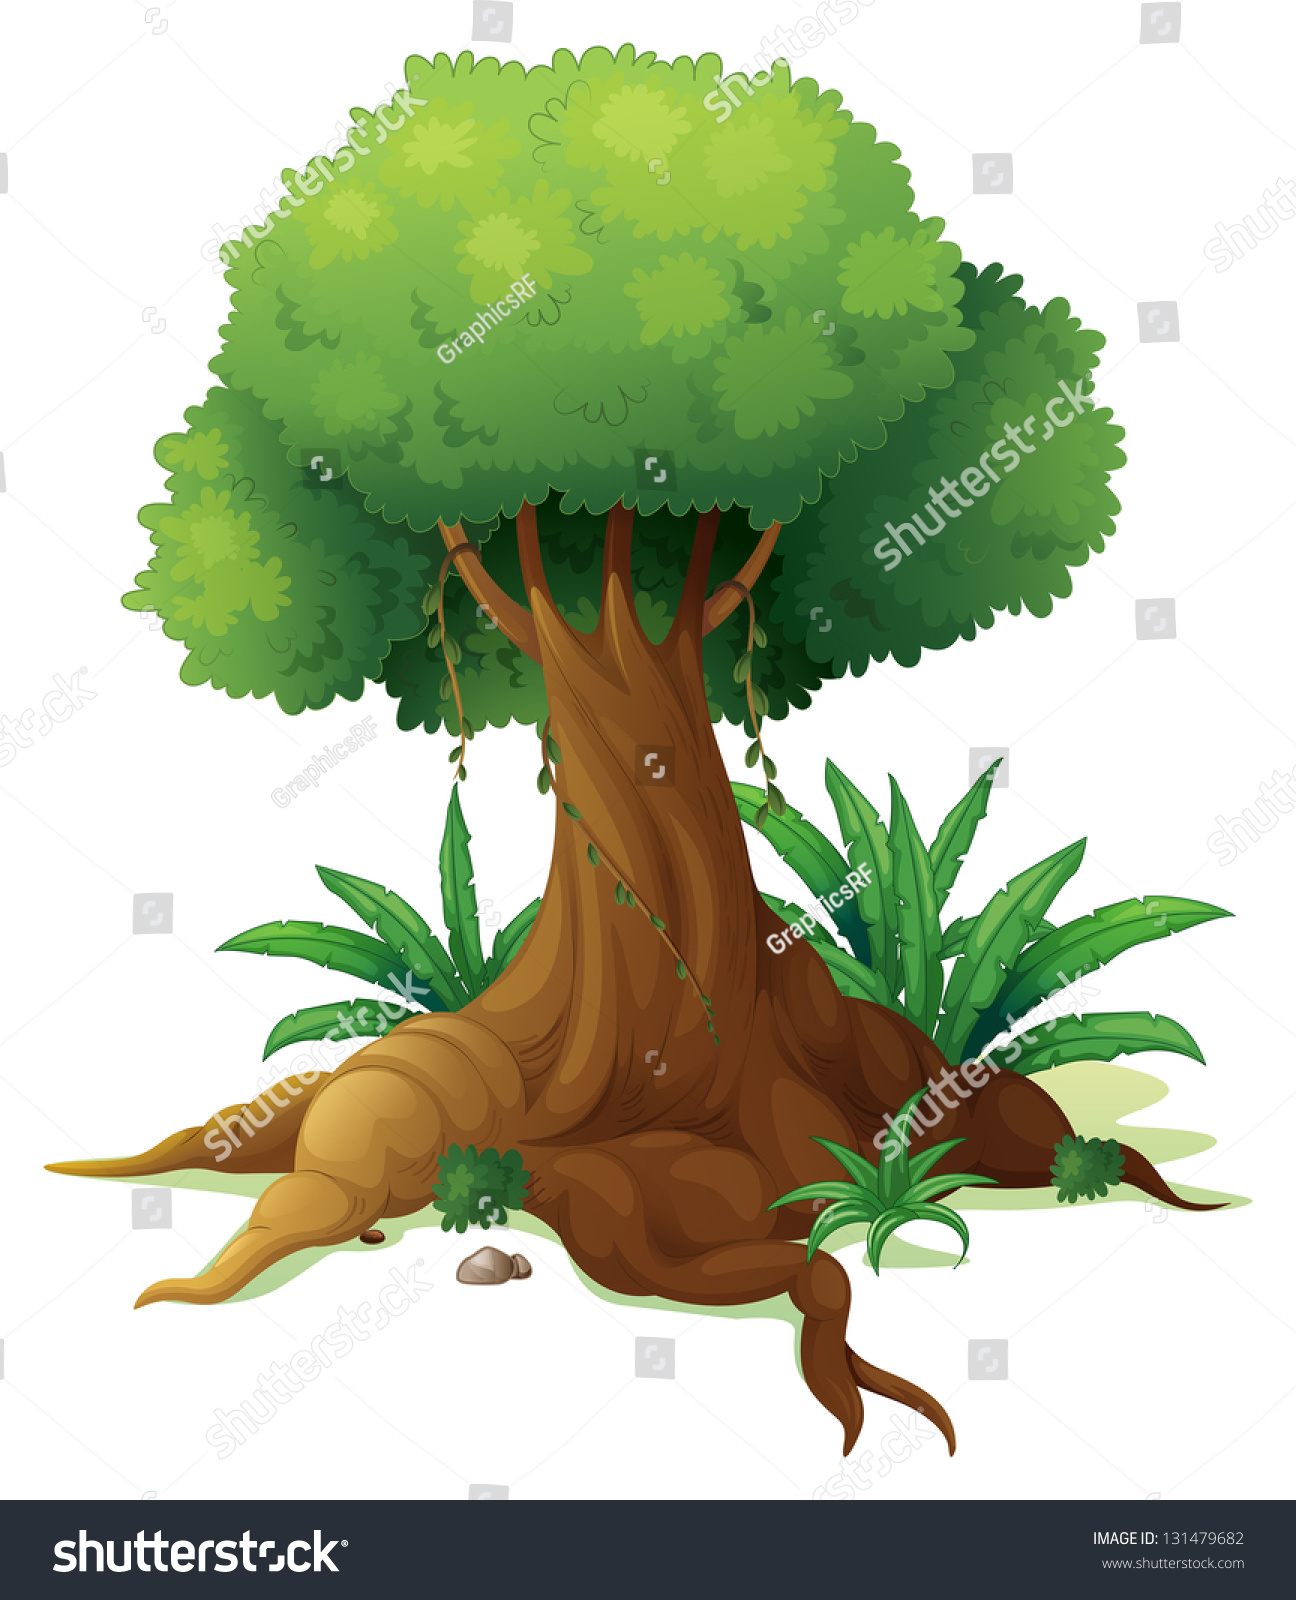 Illustration Of A Big Tree On A White Background - 131479682 : Shutterstock